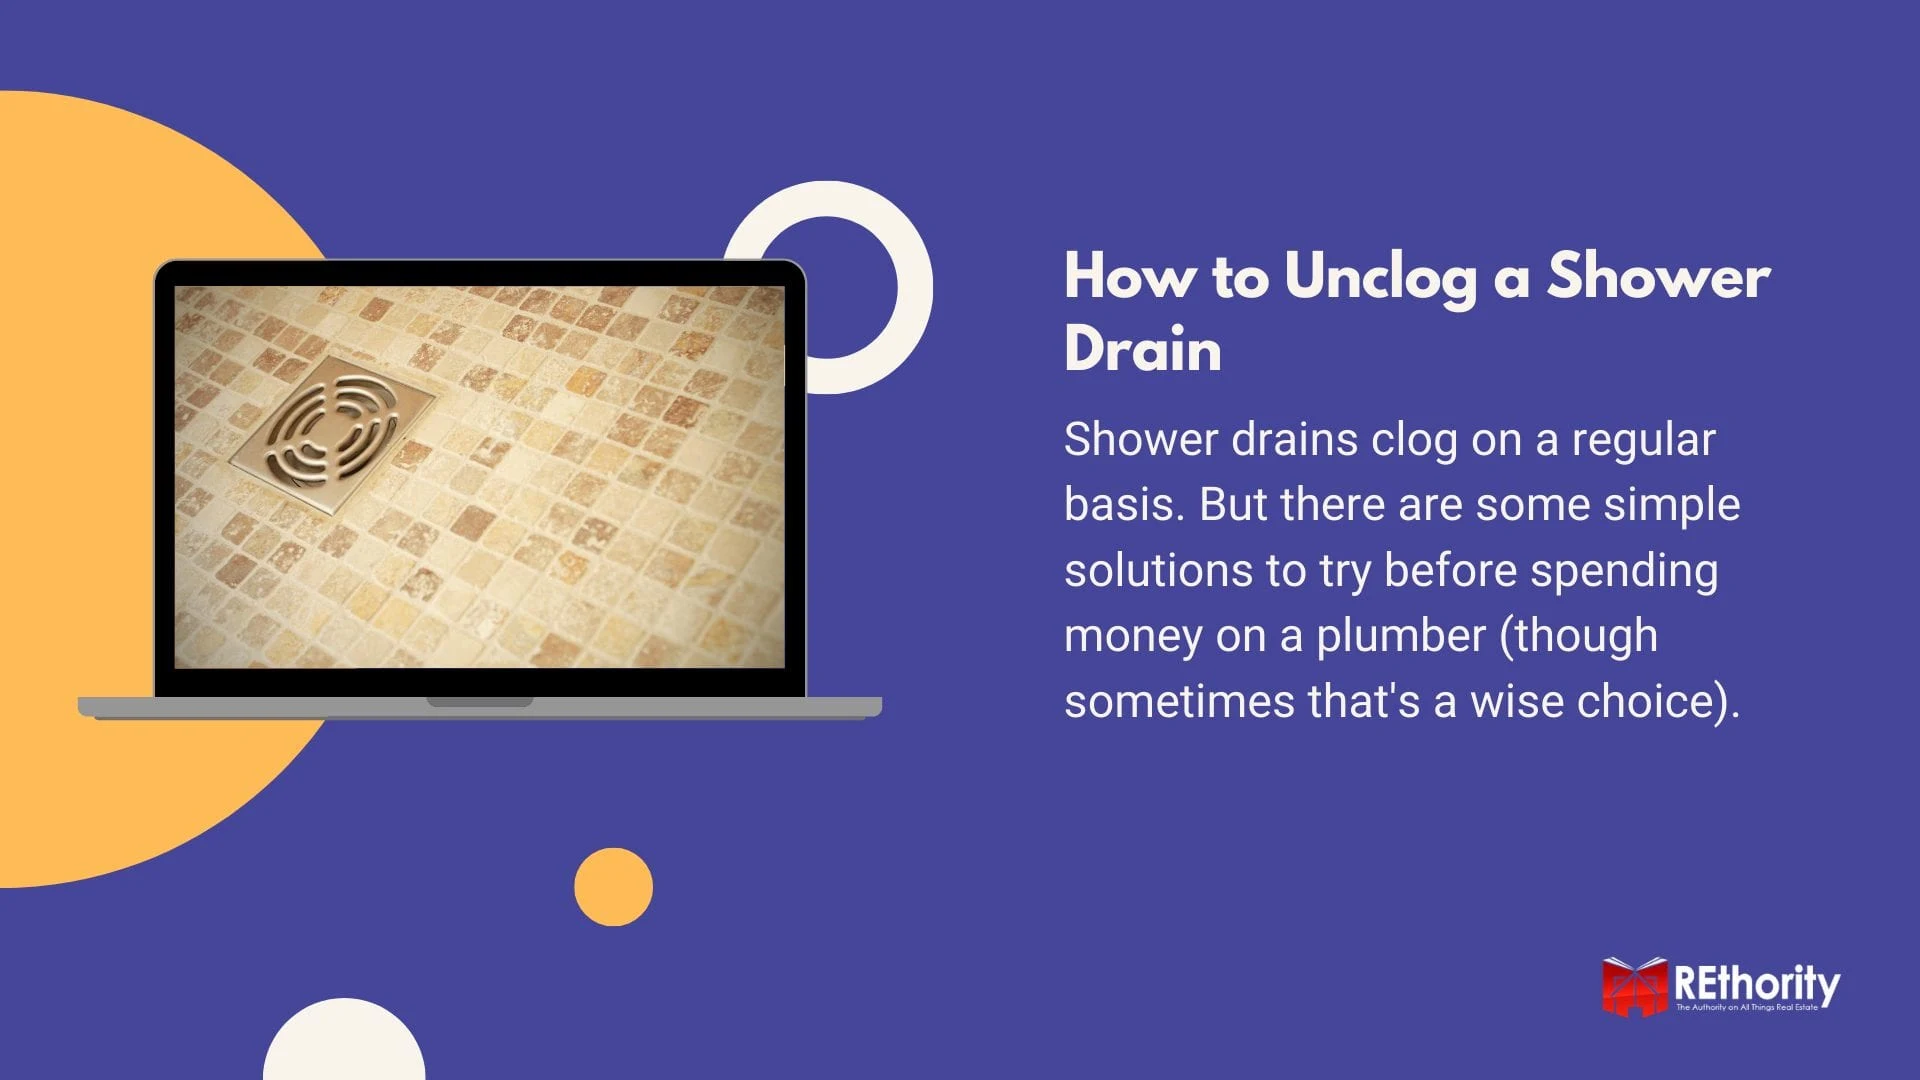 How to Unclog a Shower Drain graphic featuring an image of one displayed on a computer